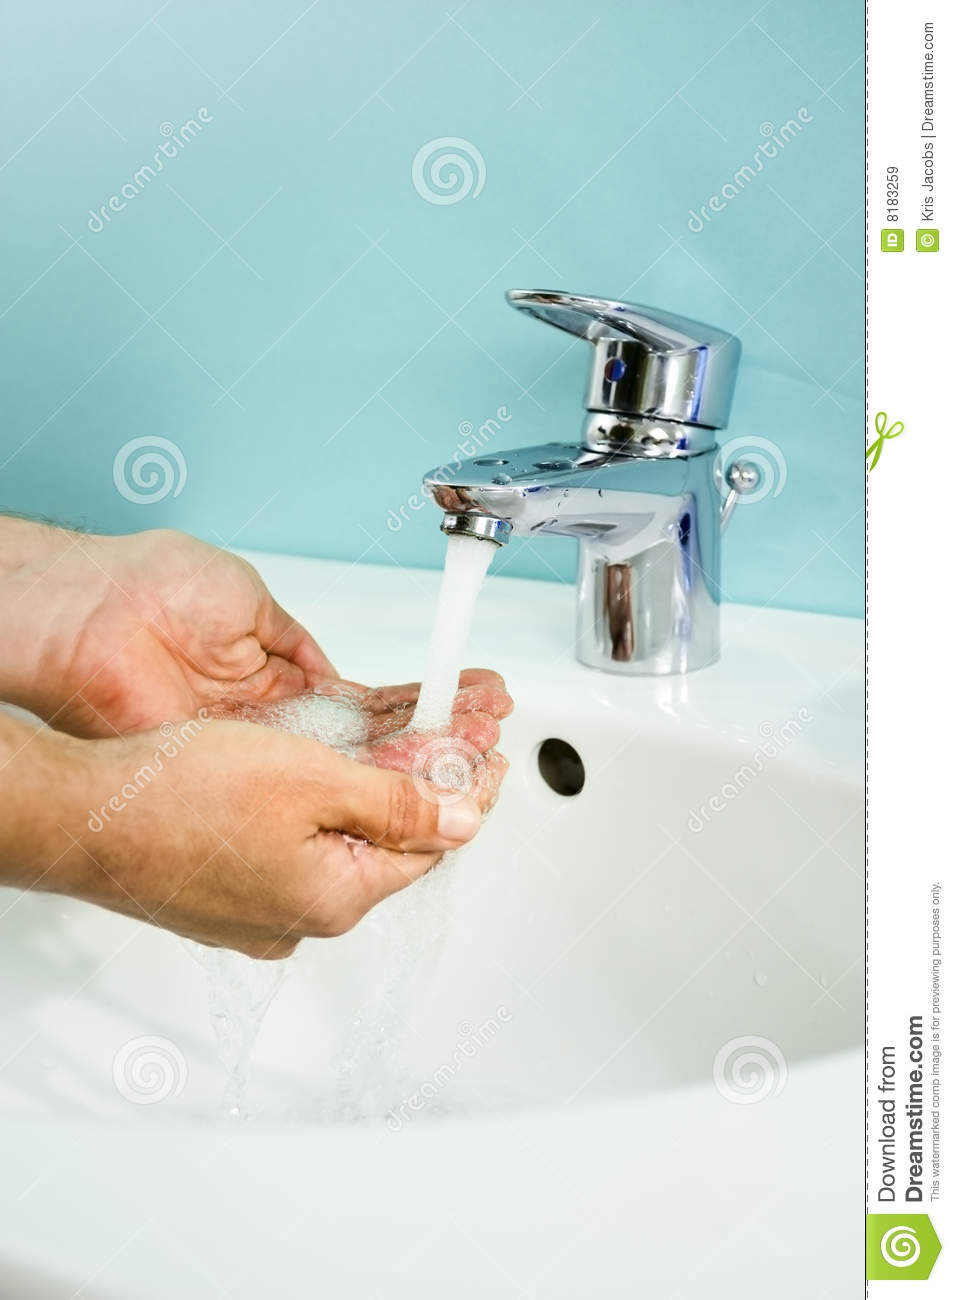 Hands Of A Person Being Washed Under A Tap  Hygiene Is Important 